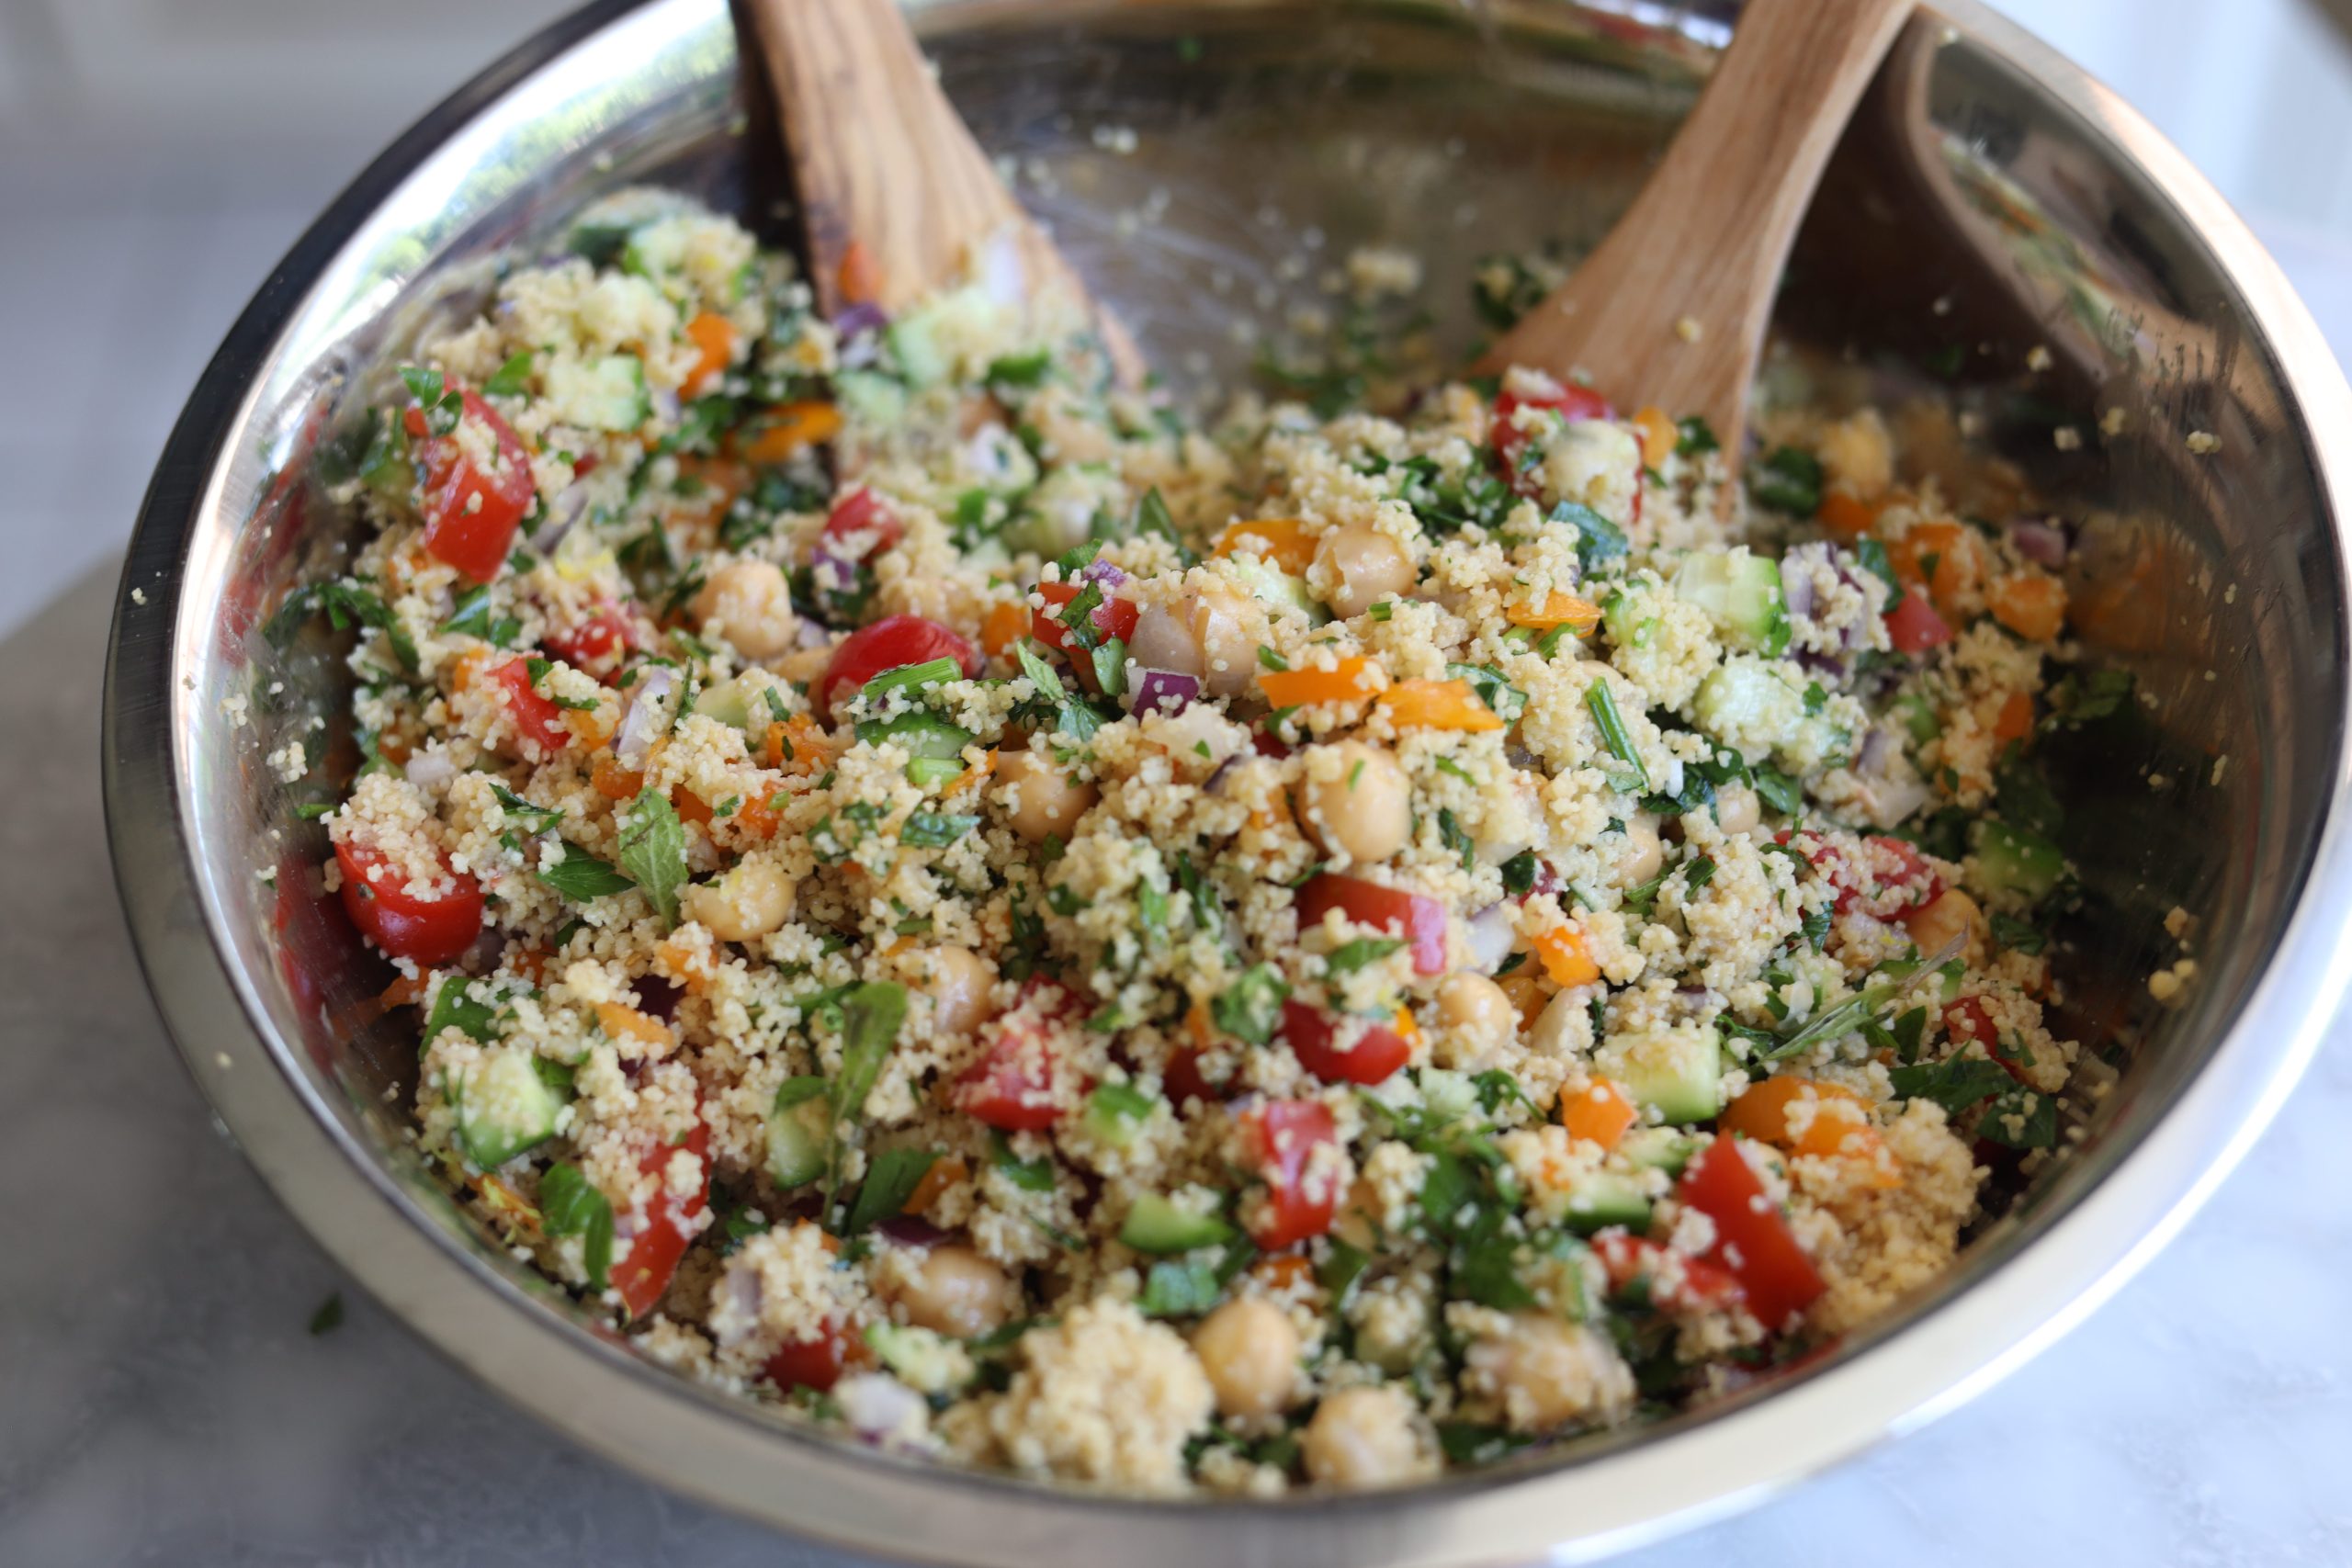 taboule salad with cous cous and vegetables close up